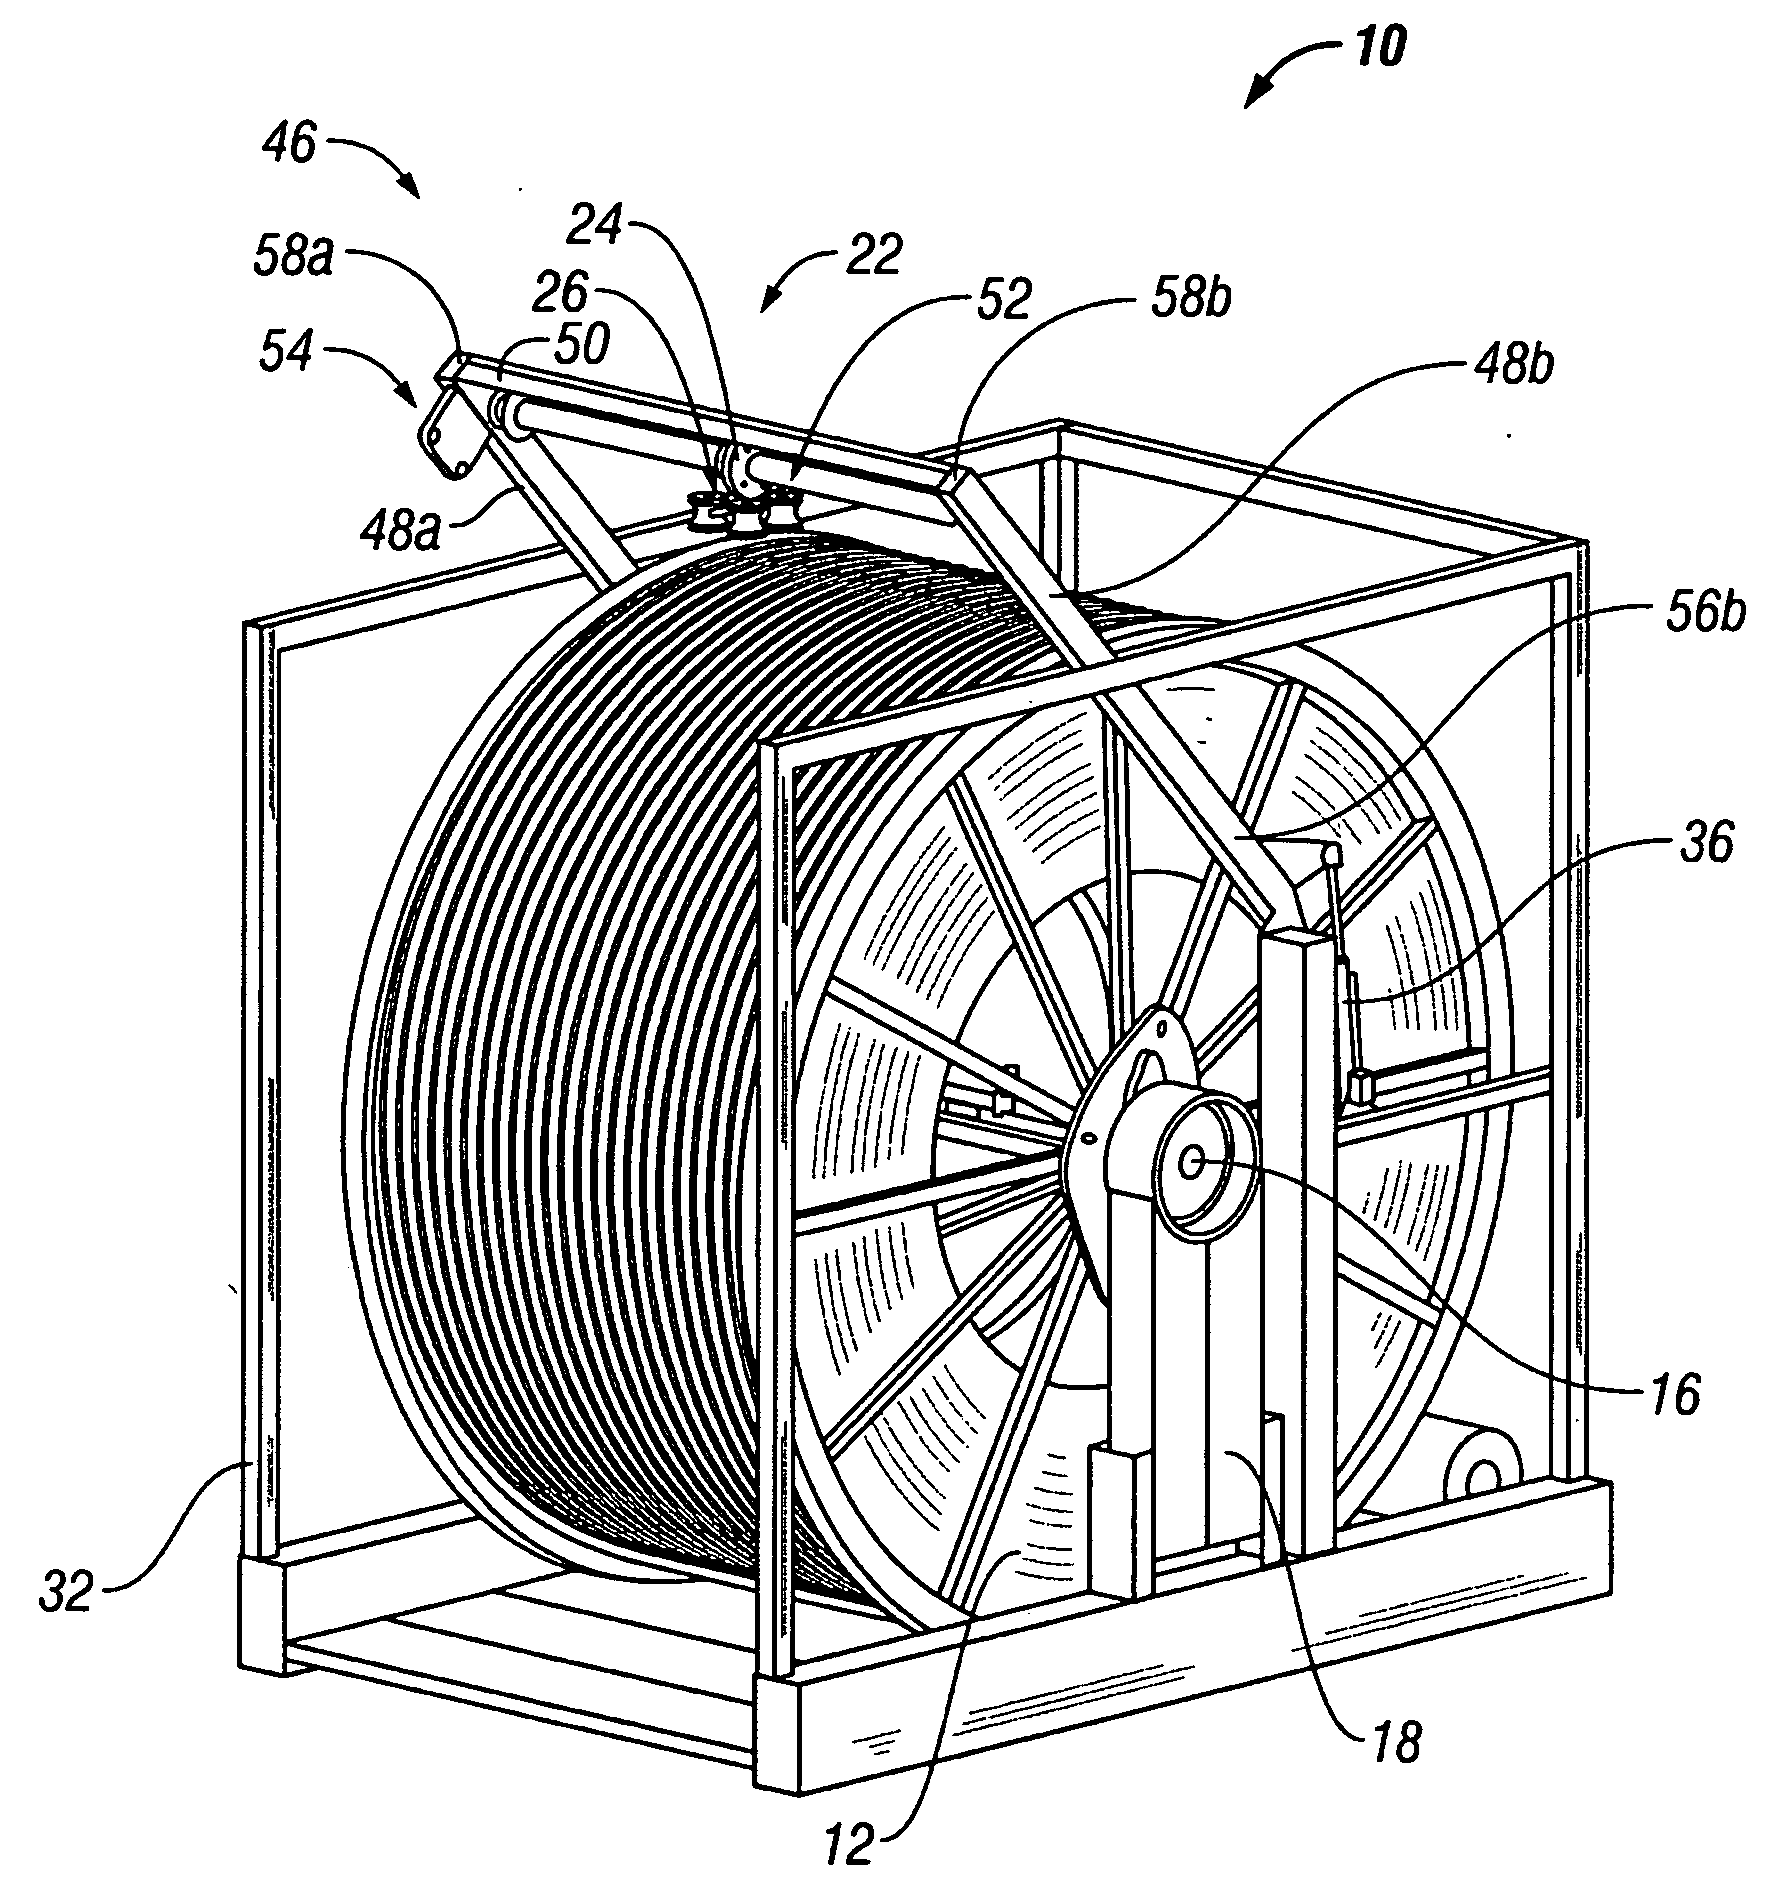 Level-wind system for coiled tubing